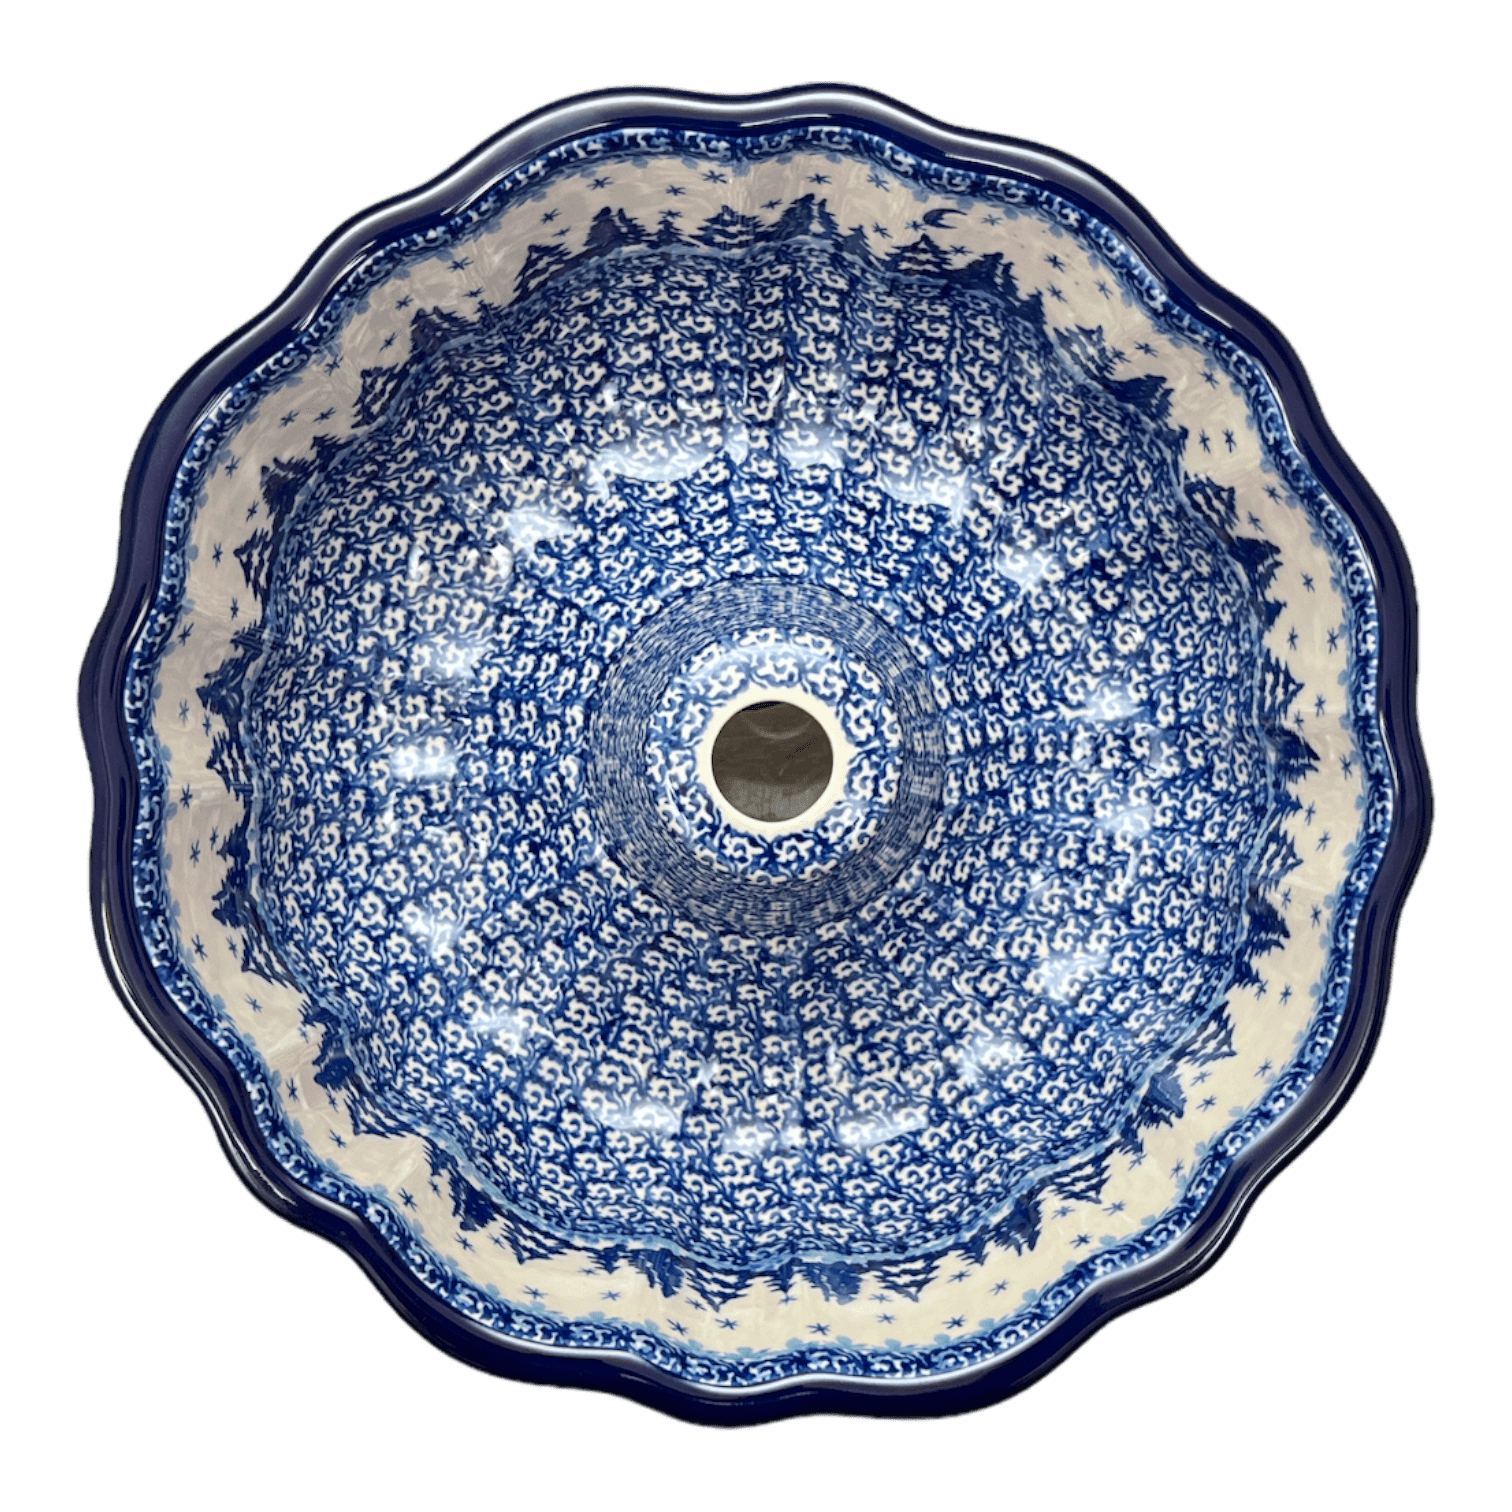 Small Porcelain Ceramic Bundt Cake Pan Blue White Country Farmhouse Wall  Hanging